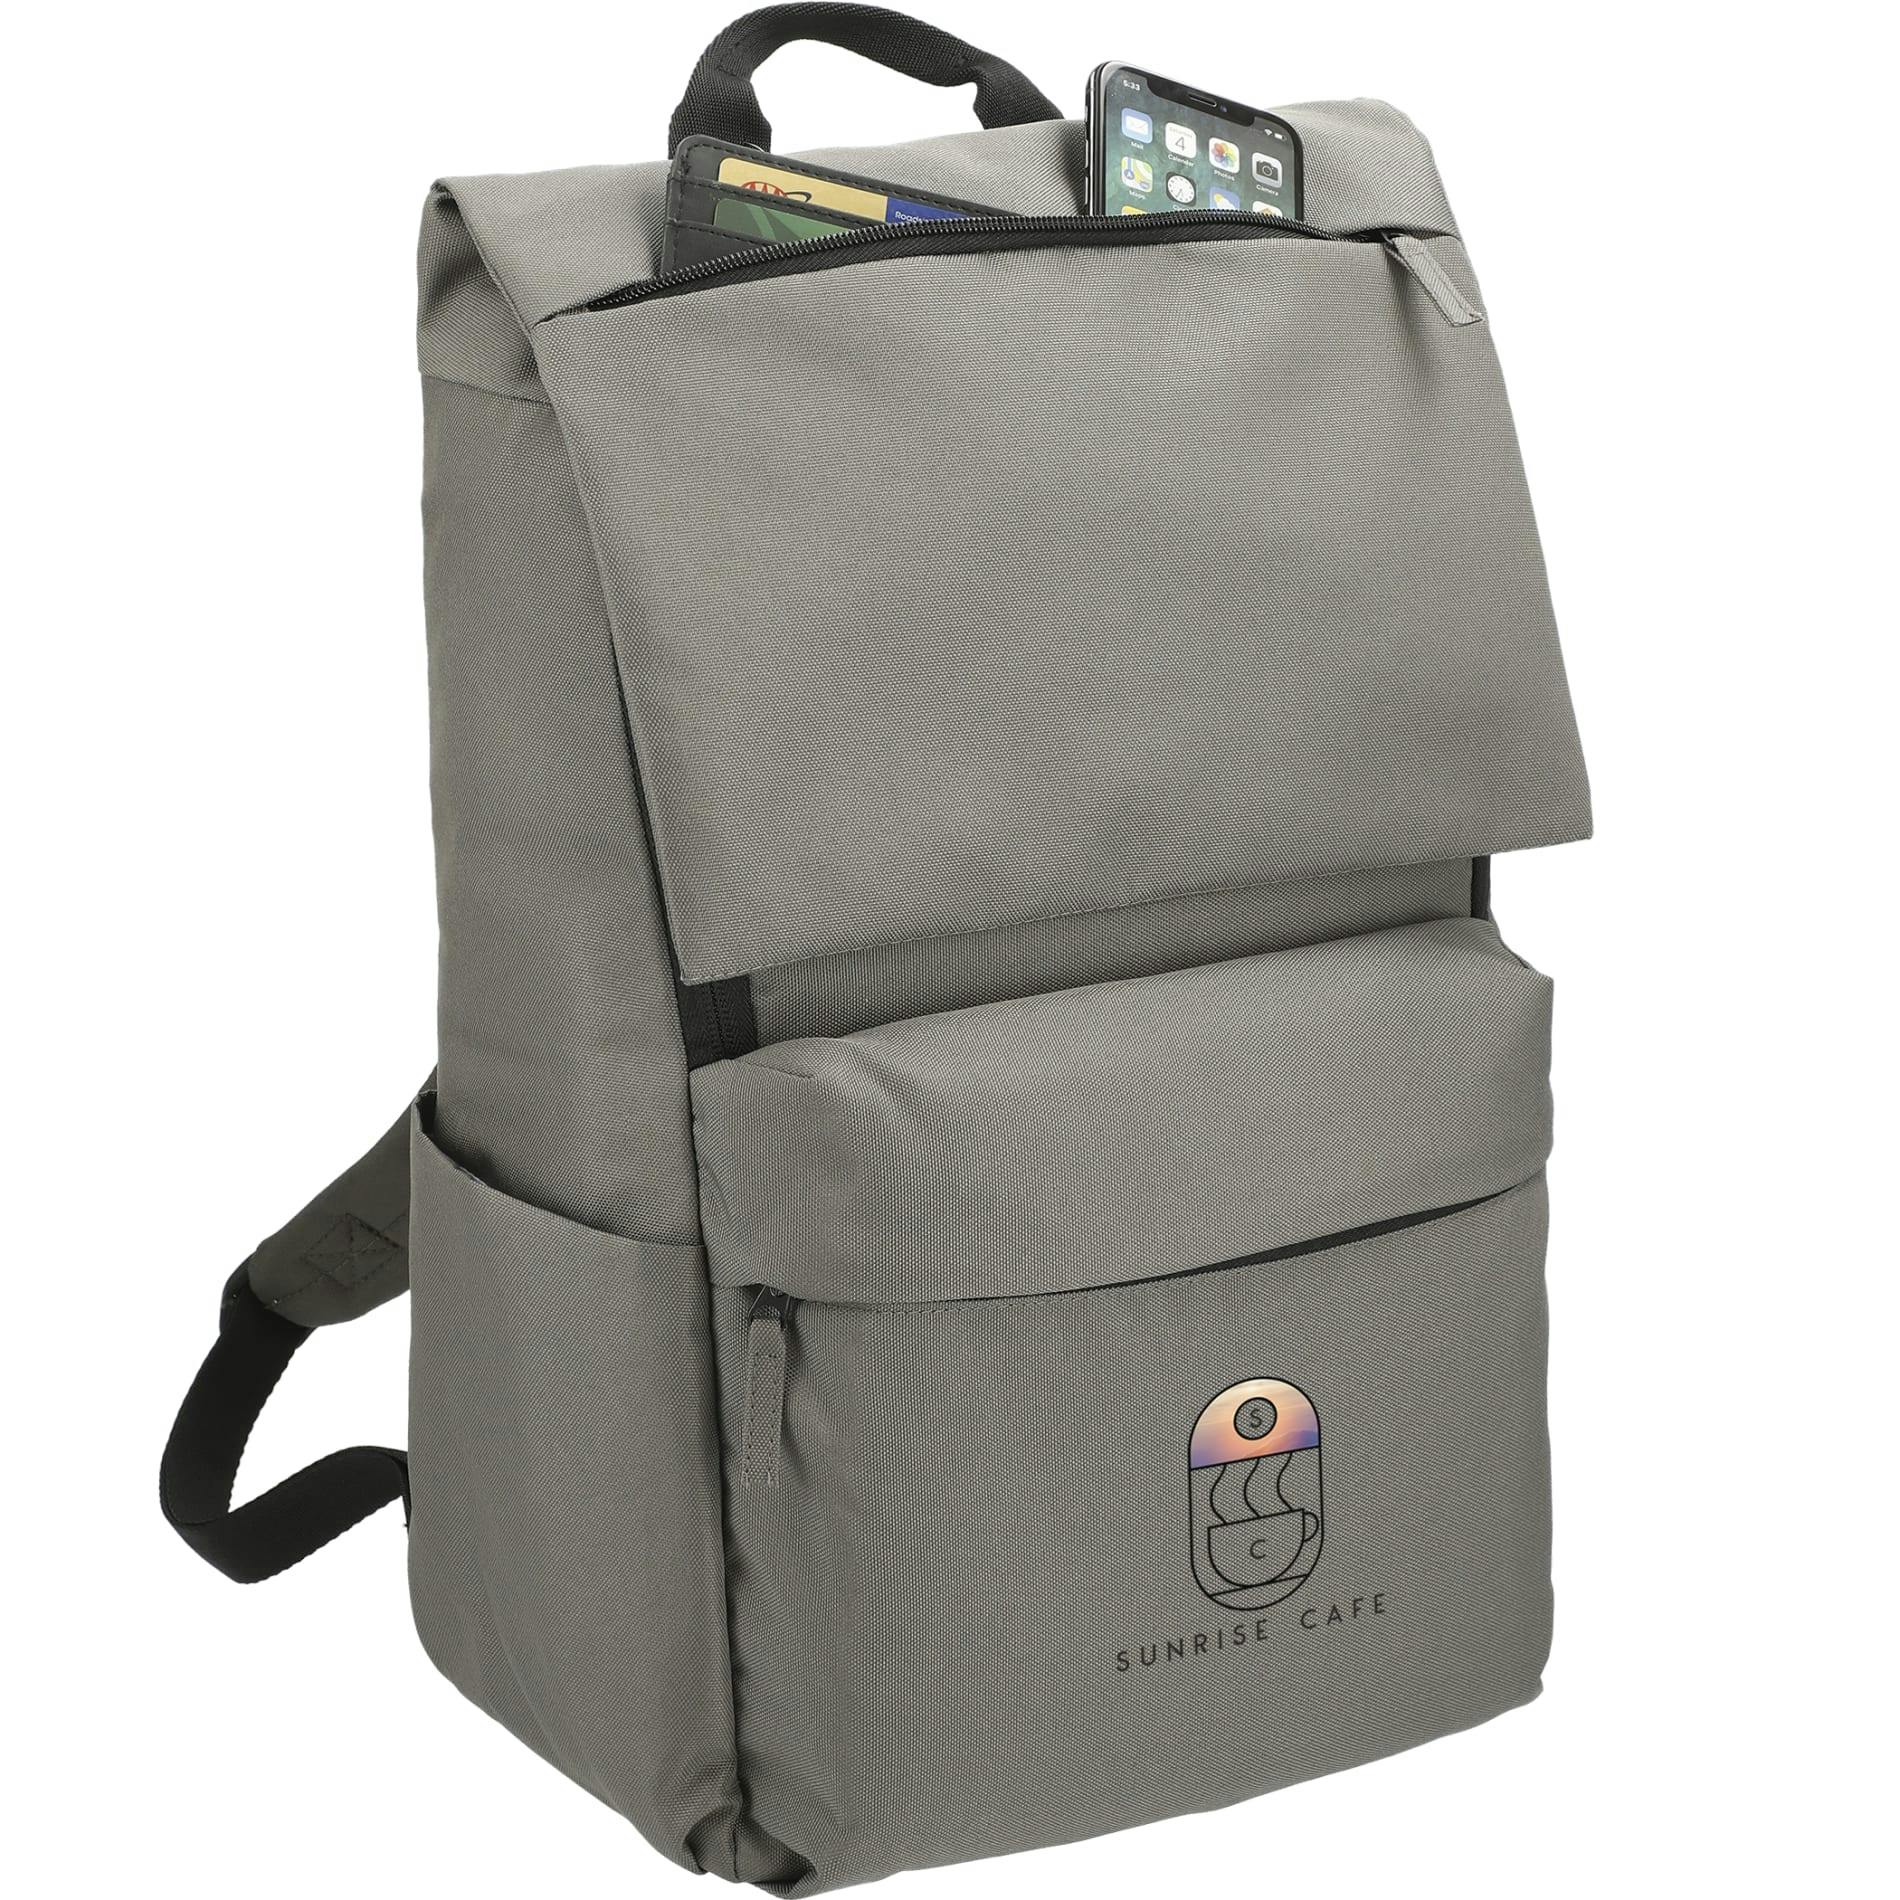 Merritt Recycled 15" Computer Backpack - additional Image 2